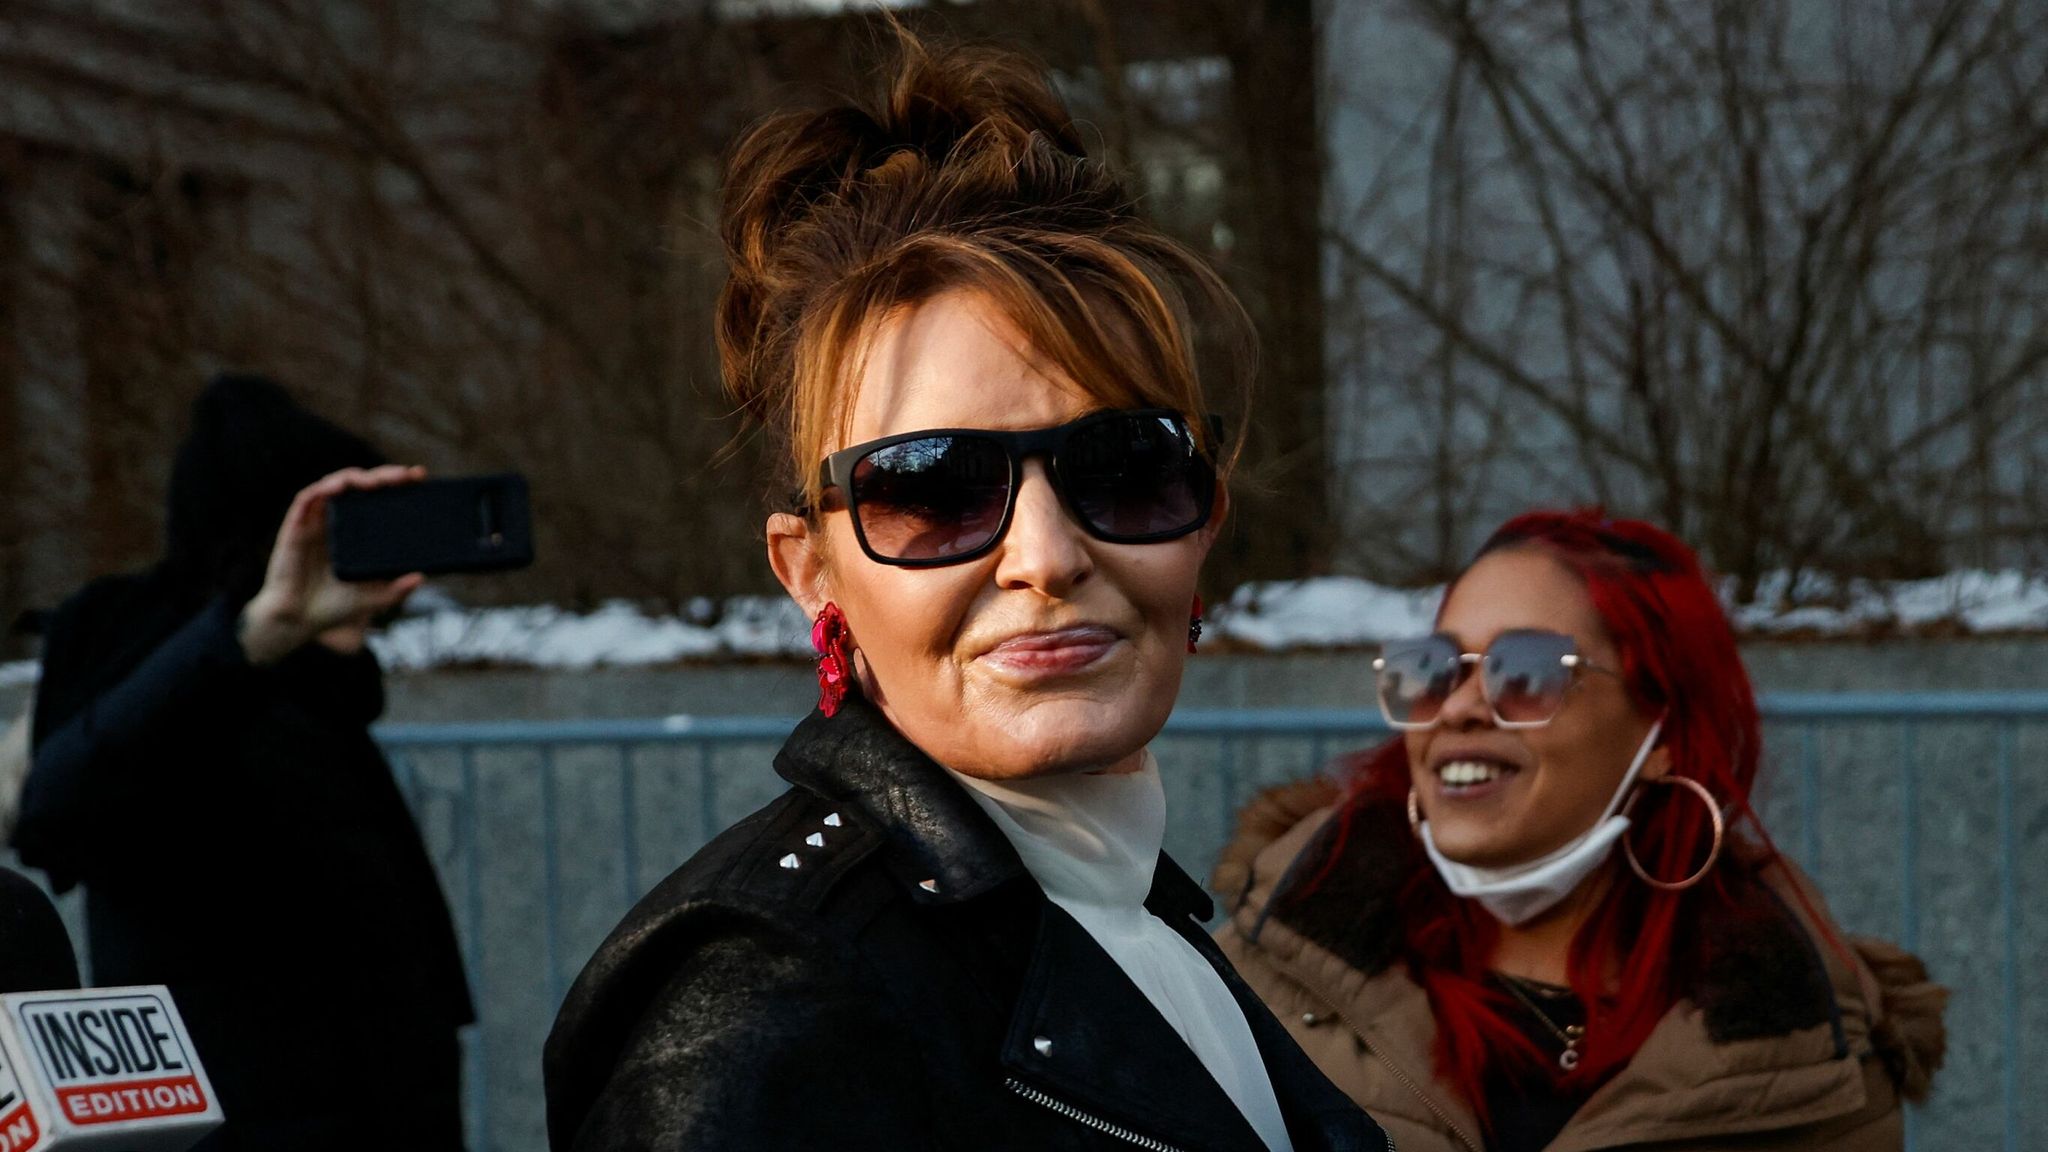 Judge to dismiss Palin's libel suit against New York Times